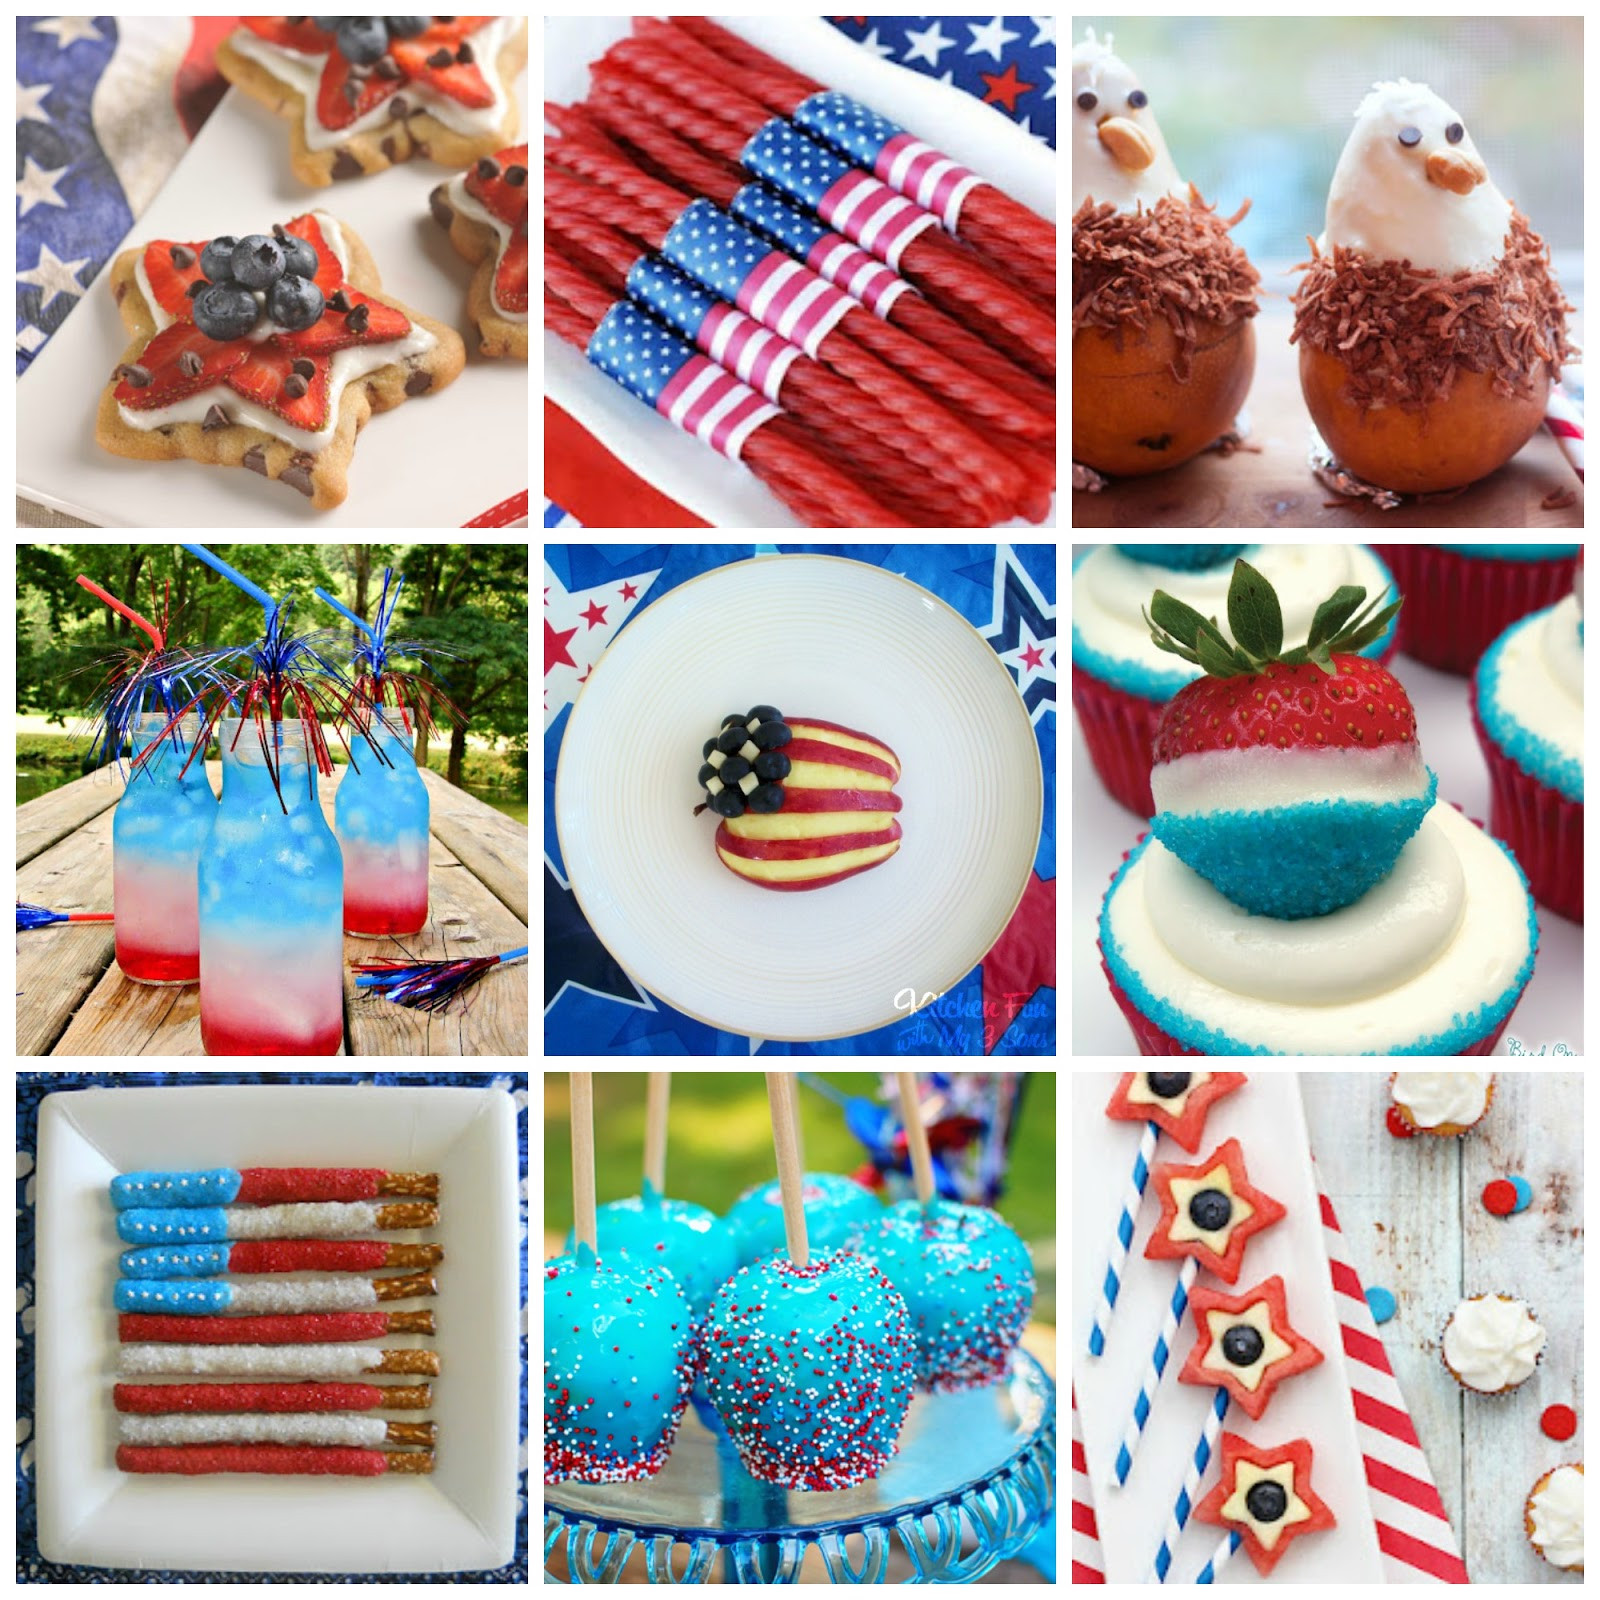 Food Ideas For 4th Of July Party
 20 July 4th Fun Food Ideas Kitchen Fun With My 3 Sons